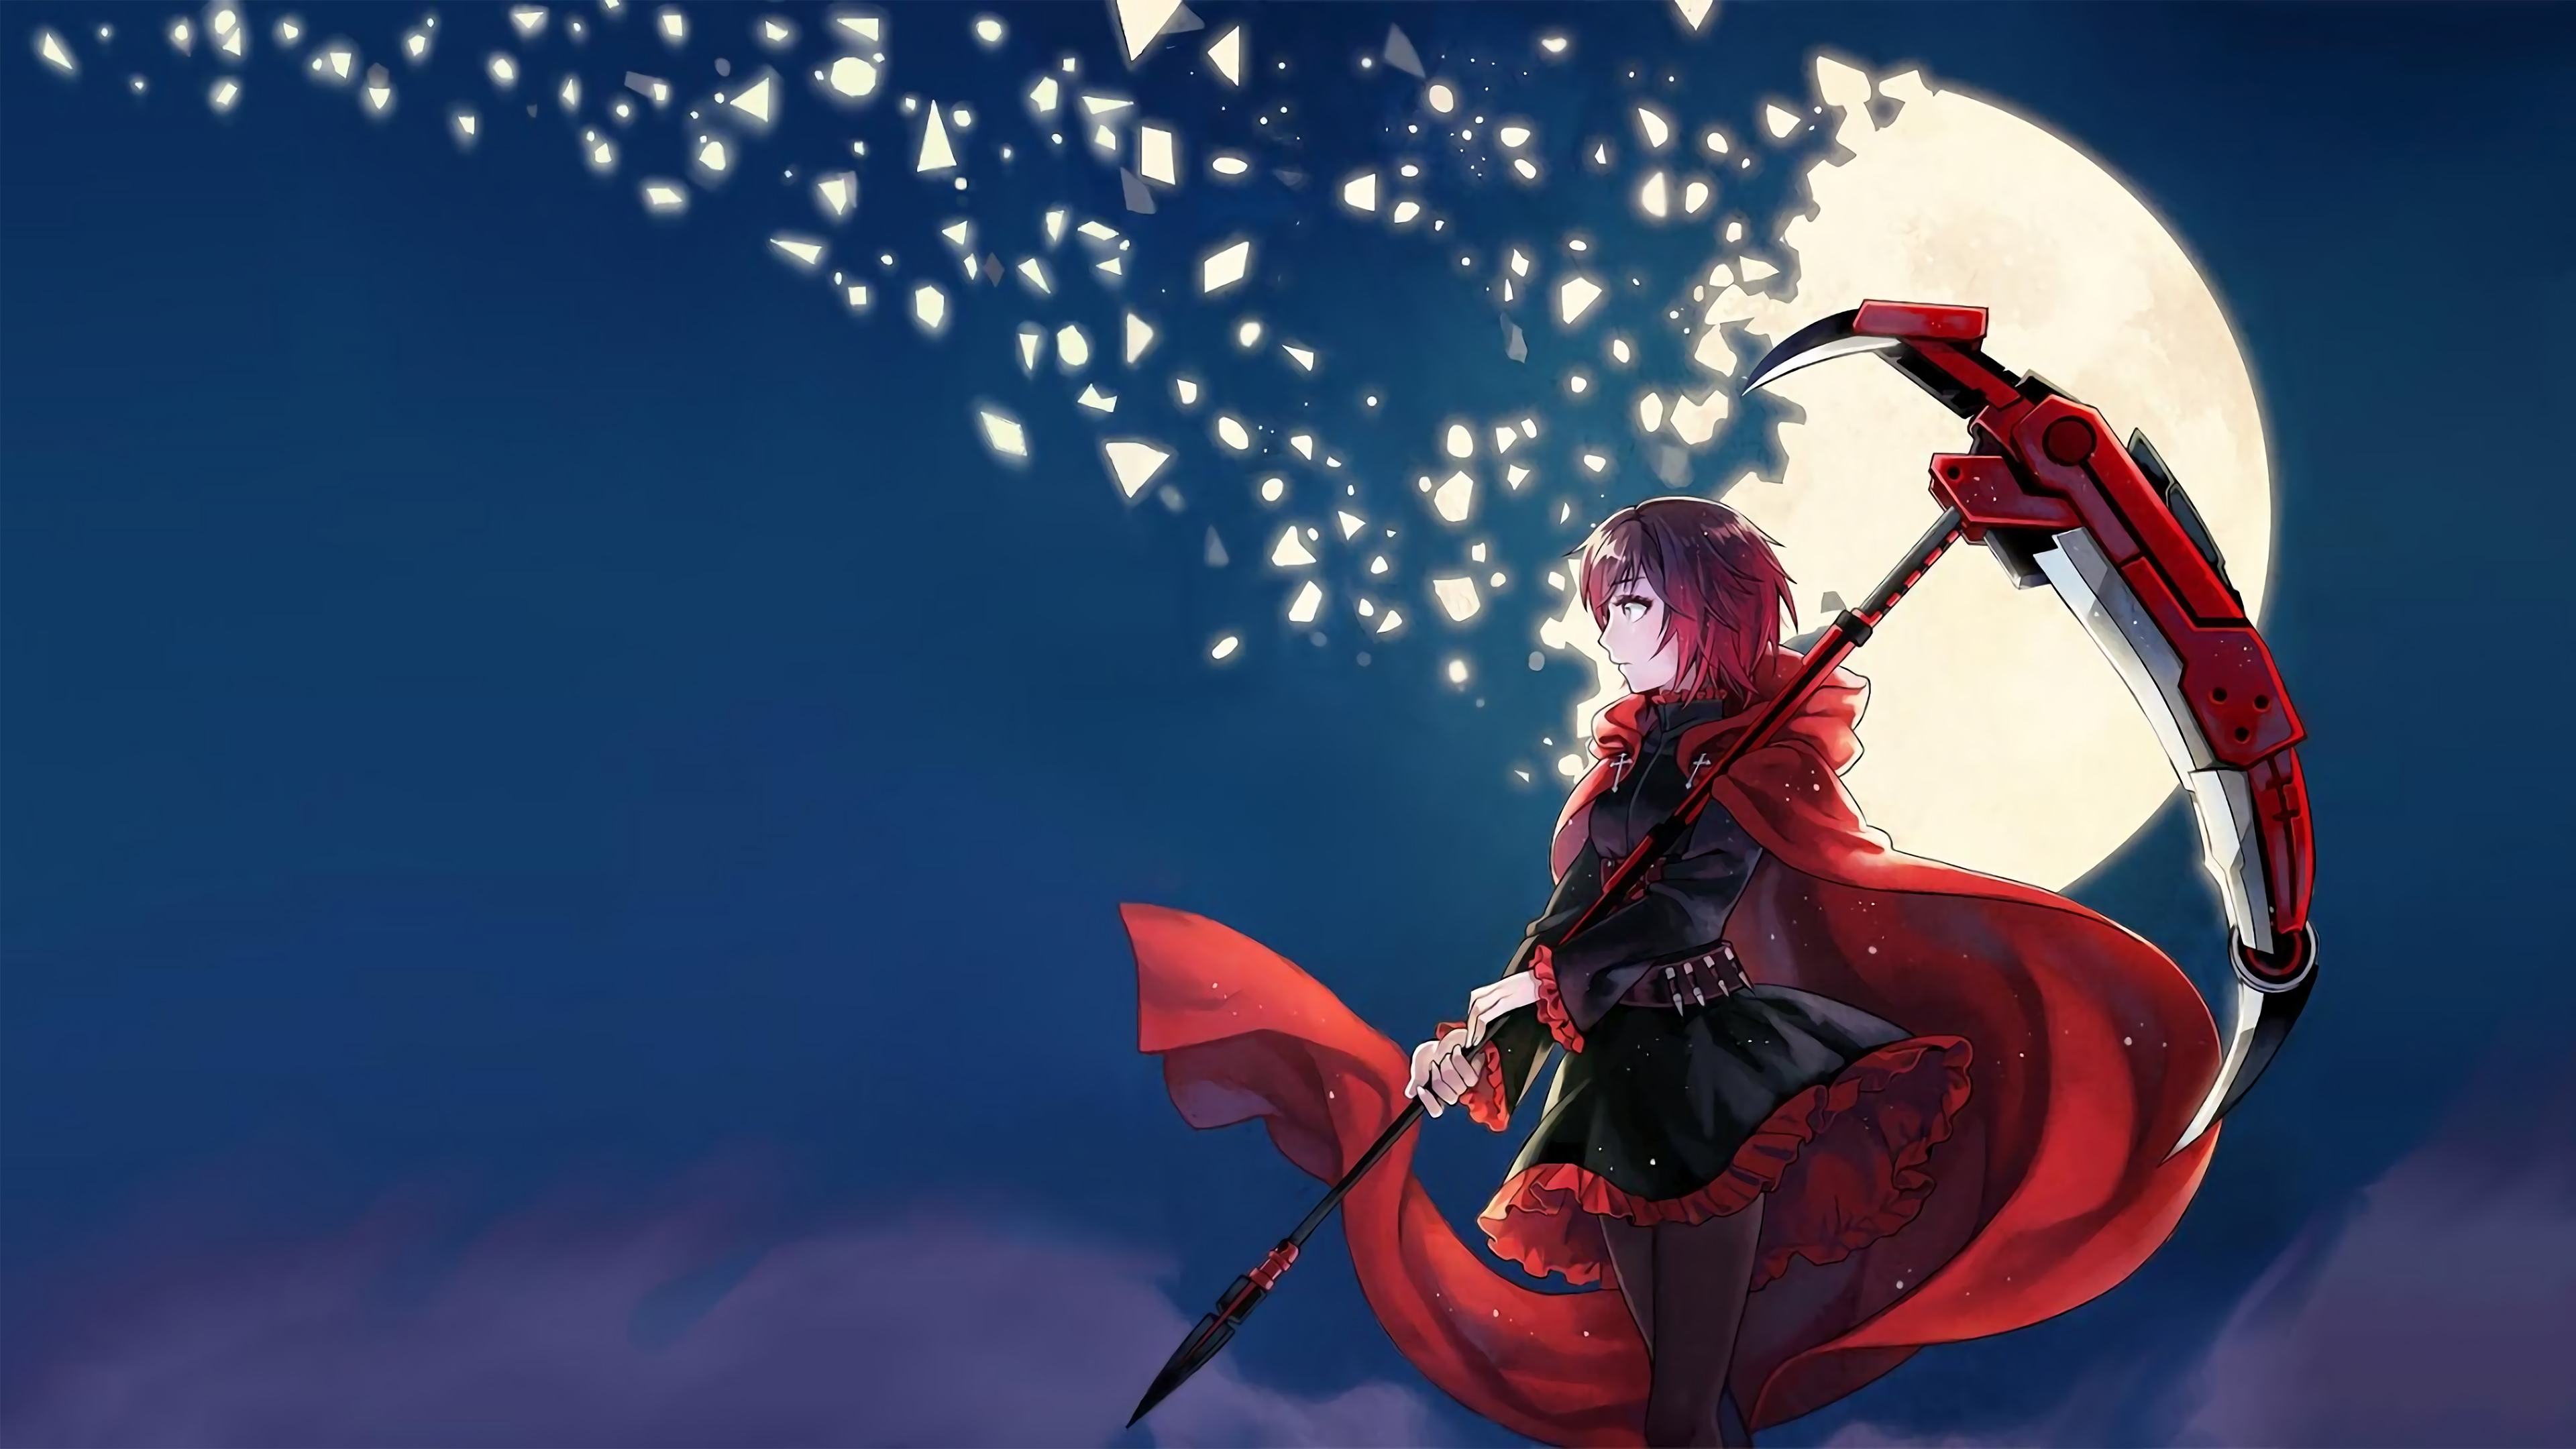 3840x2160 40+ 4K Anime RWBY Wallpapers | Background Images